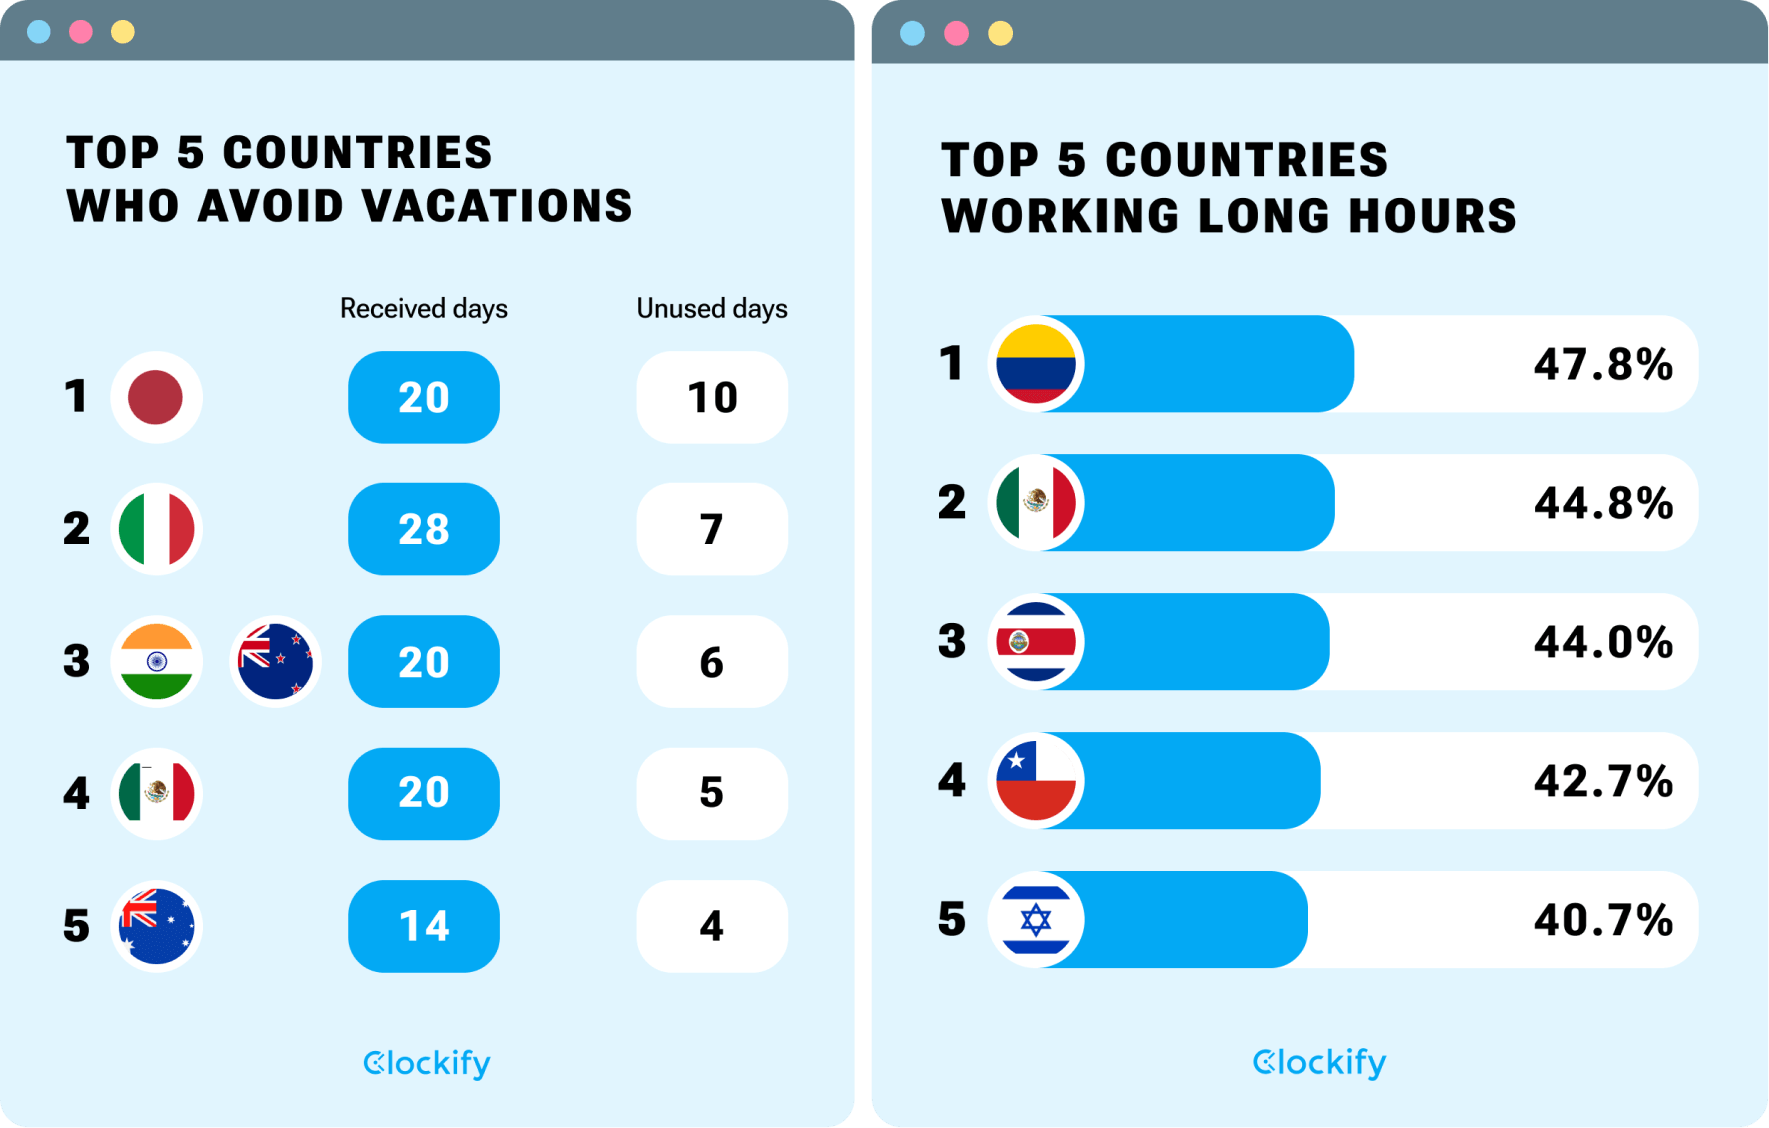 Top 5 countries who avoid vacations and top 5 cuntries working long hours